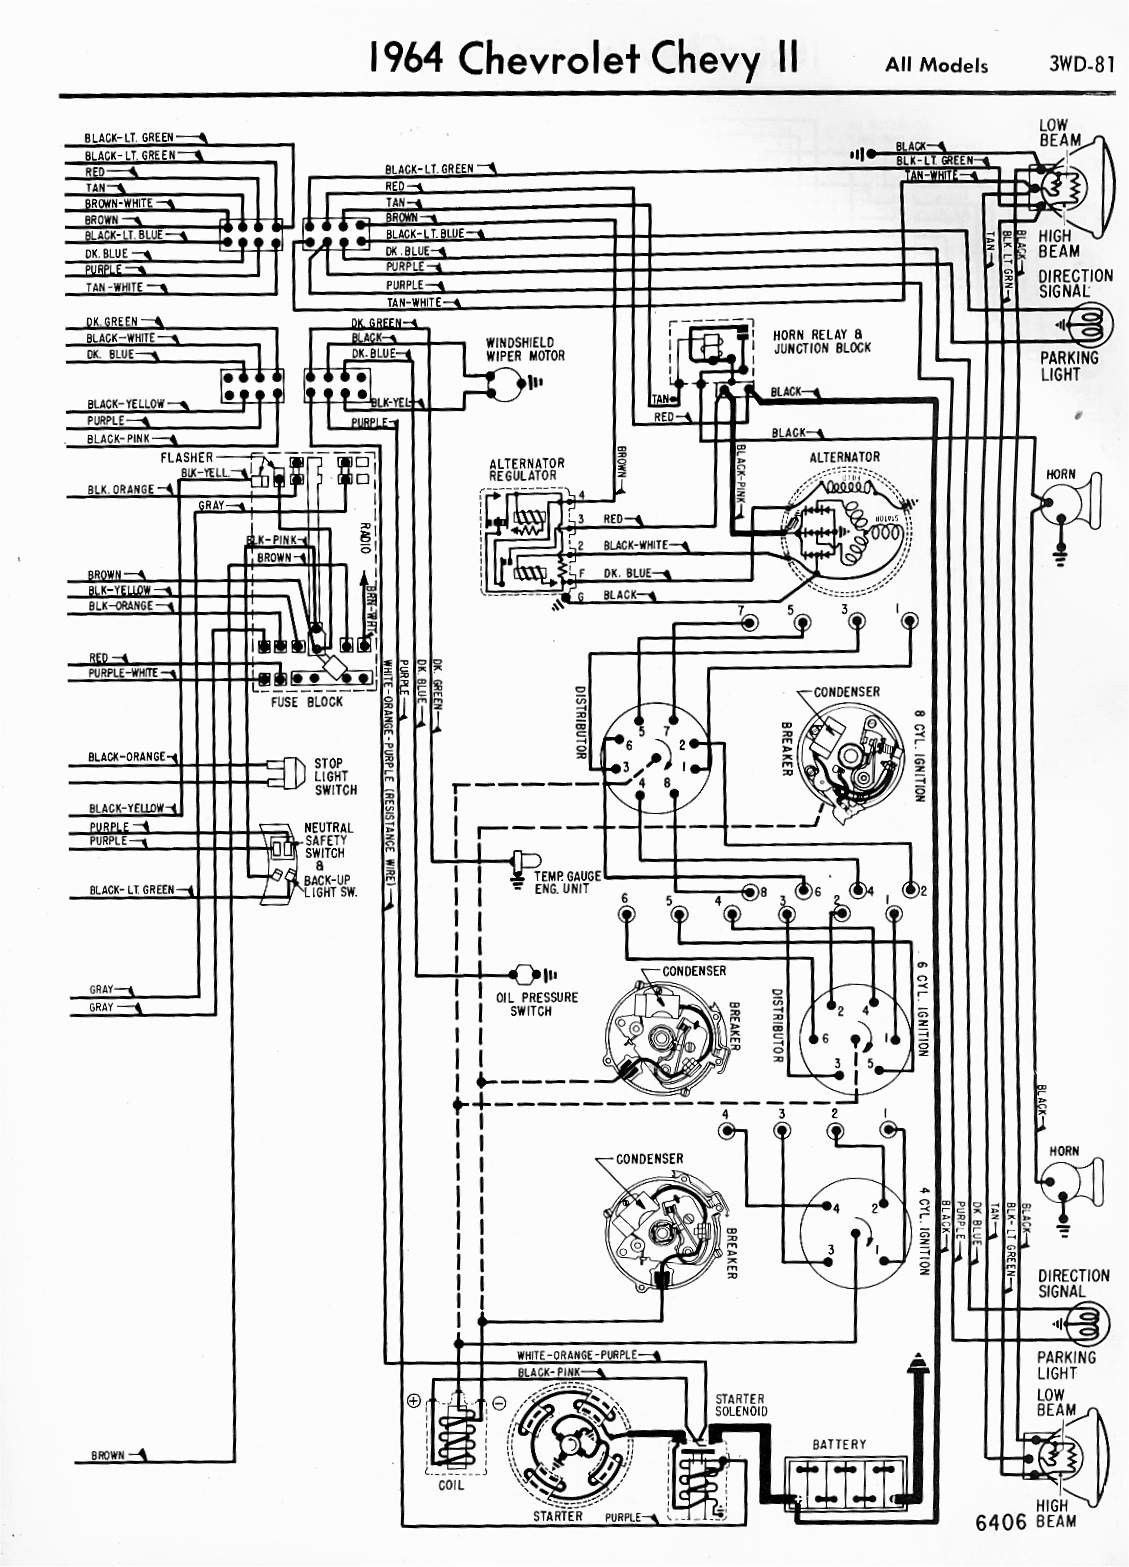 1970 chevelle wiper motor wiring diagram Collection 1965 Chevy Impala Wiring Diagram Schematic Wiring Diagrams